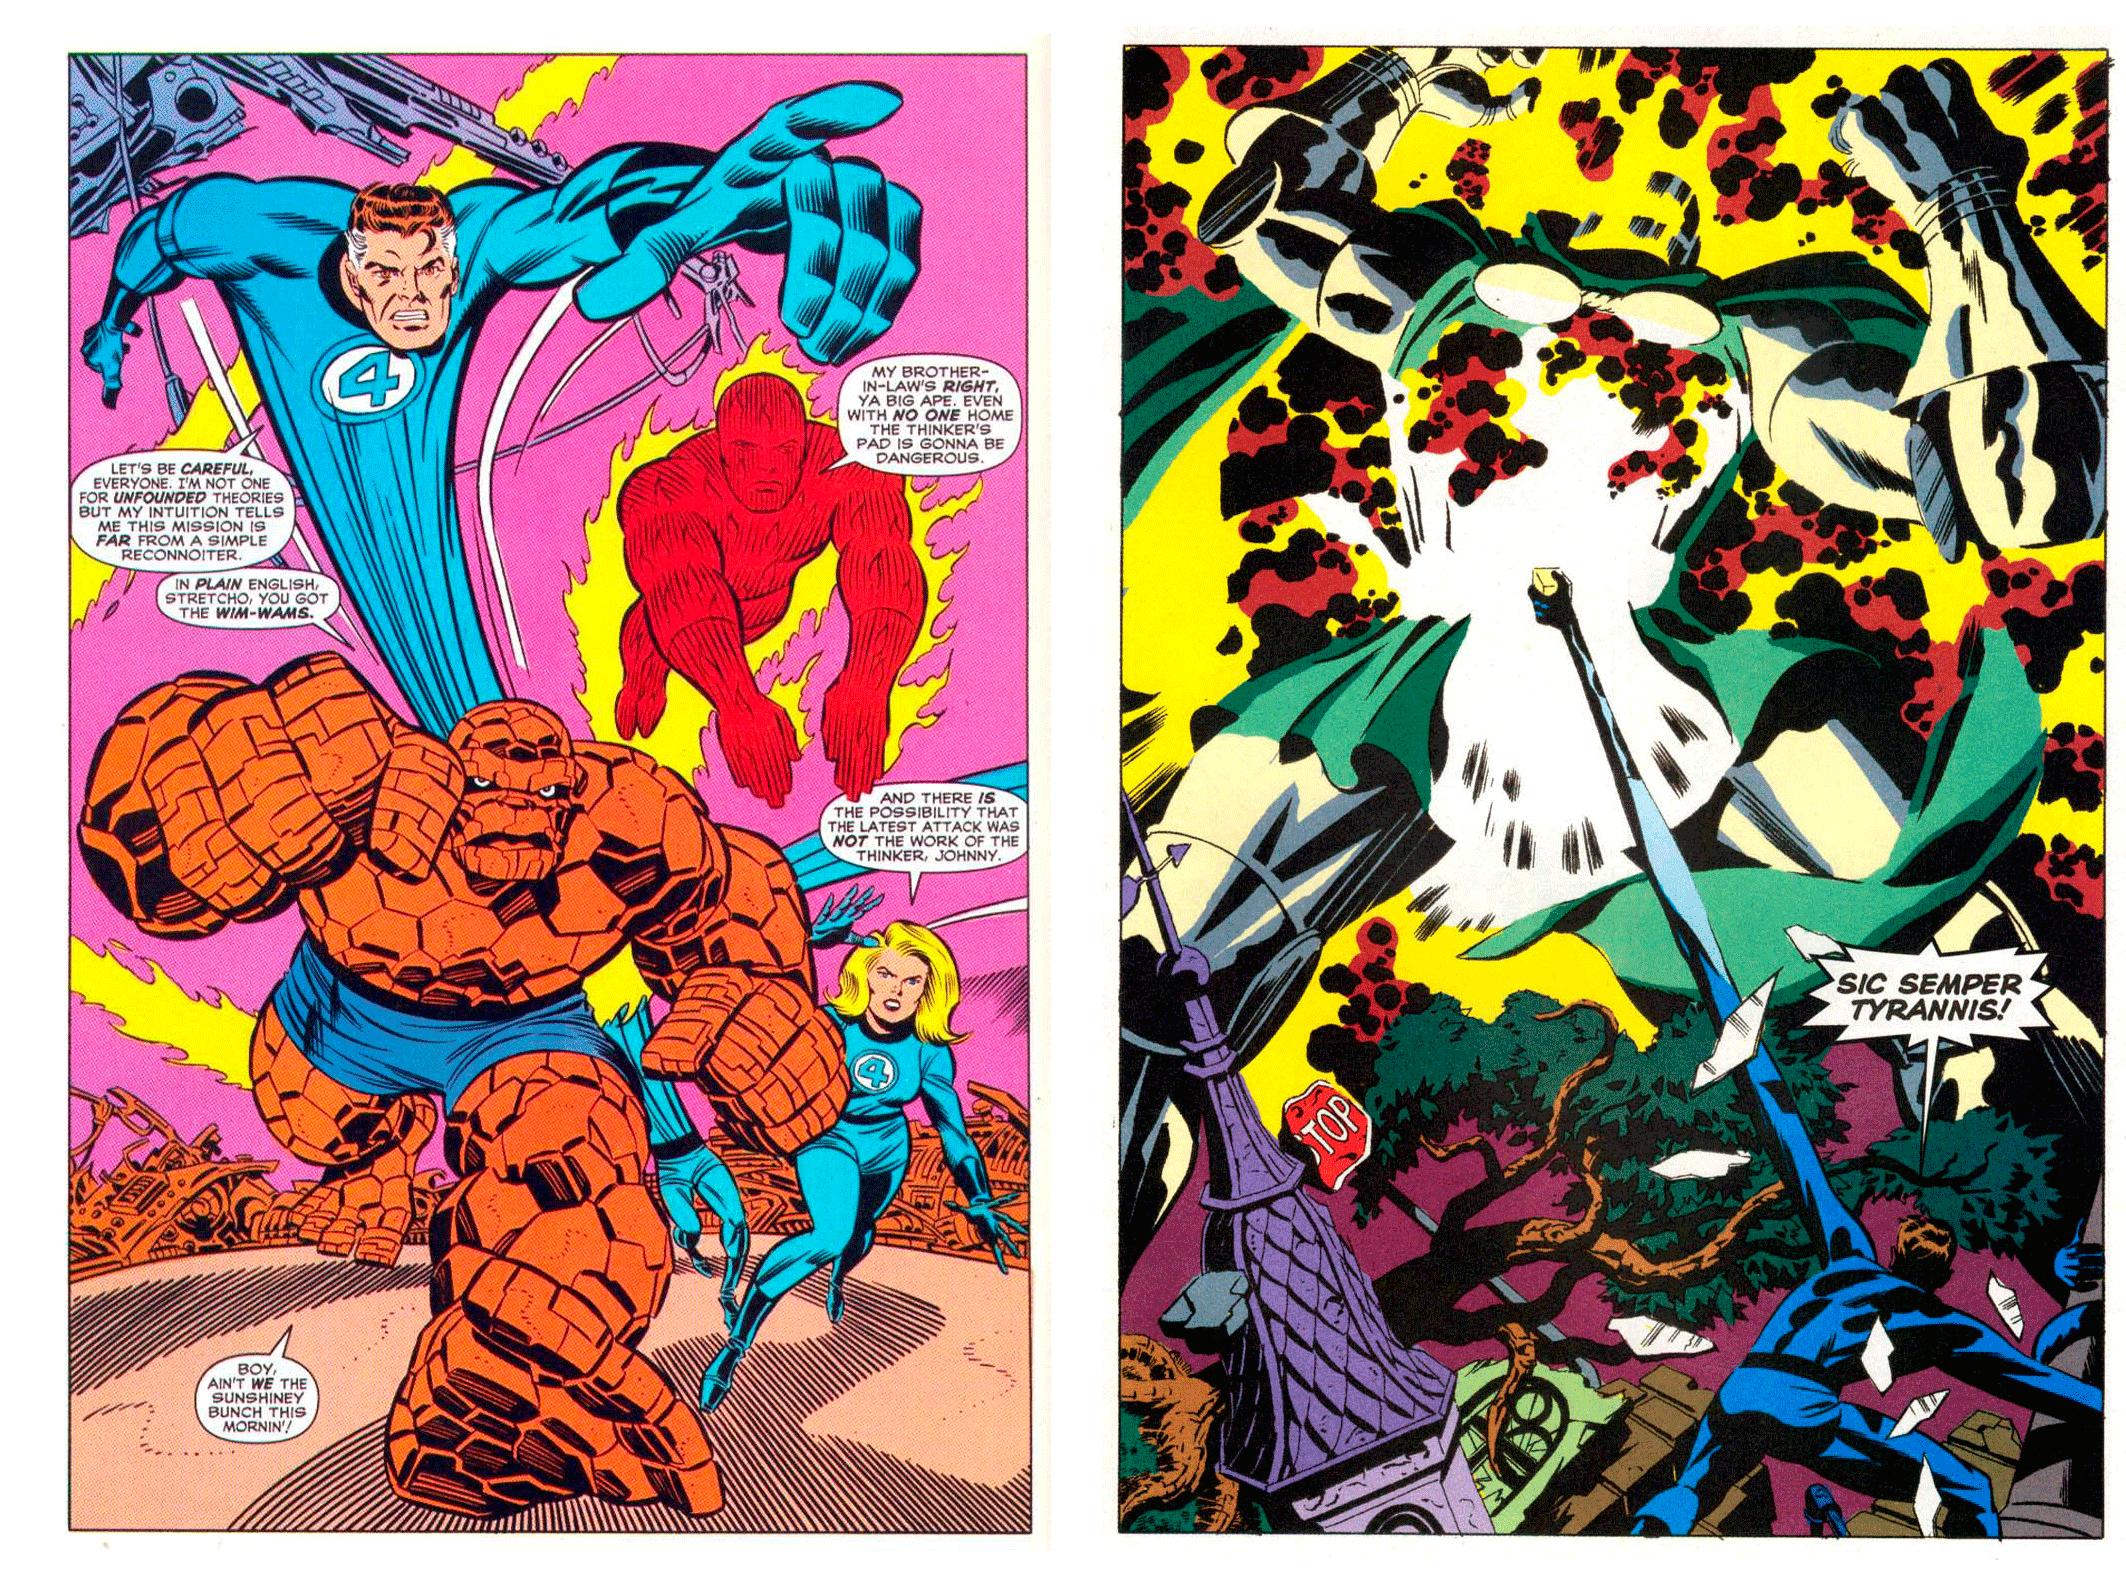 Fantastic Four The World's Greatest Comic Magazine! review